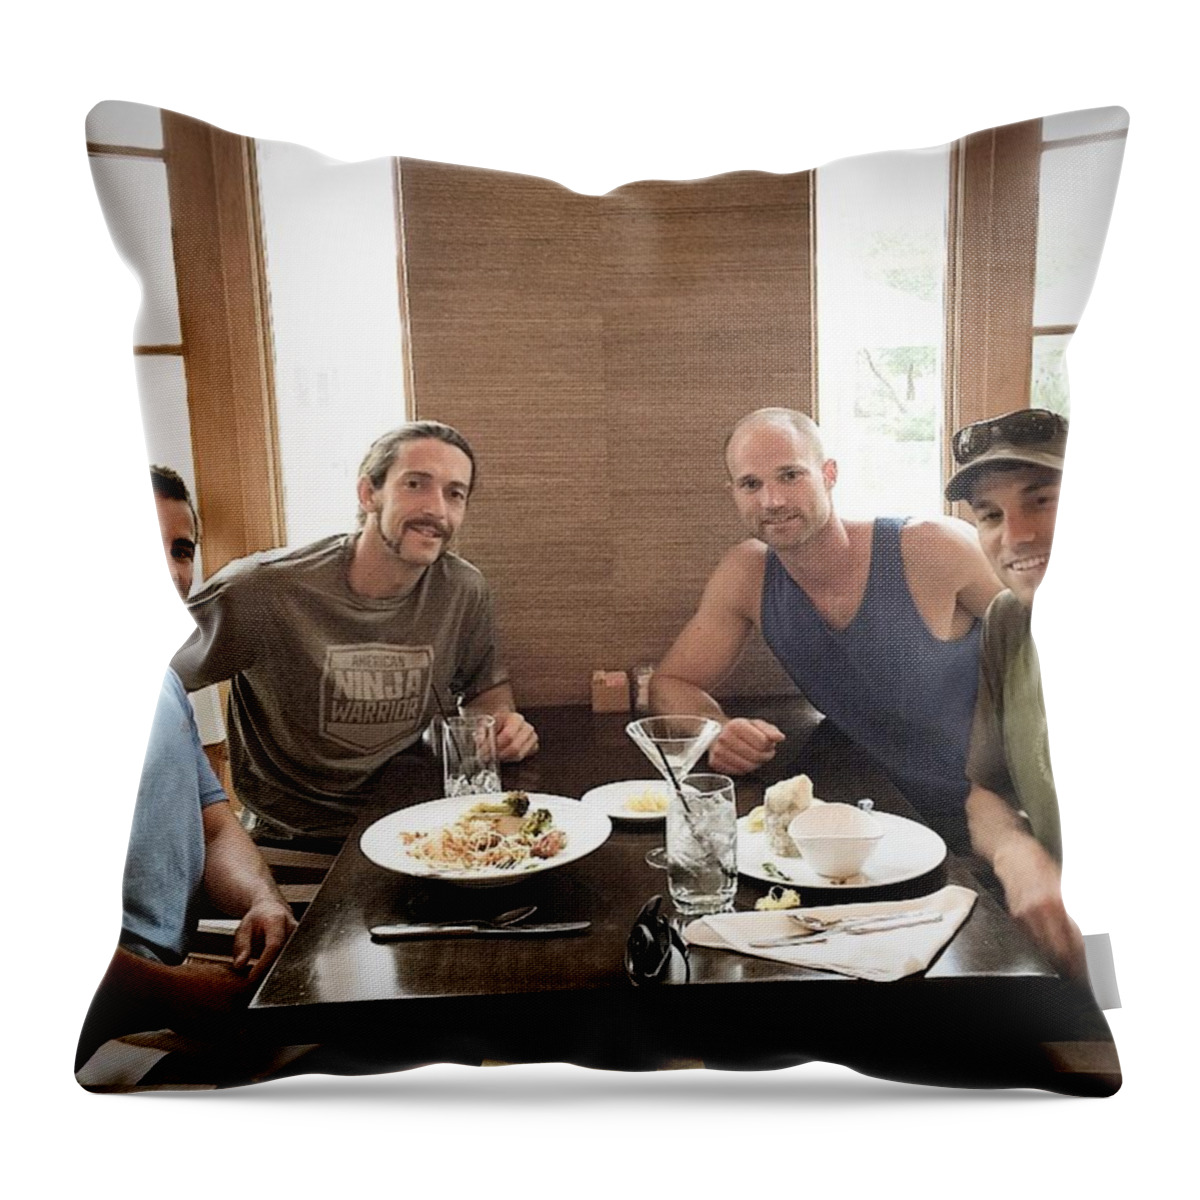 Anw7 Throw Pillow featuring the photograph Brother Wolves by Noah Kaufman